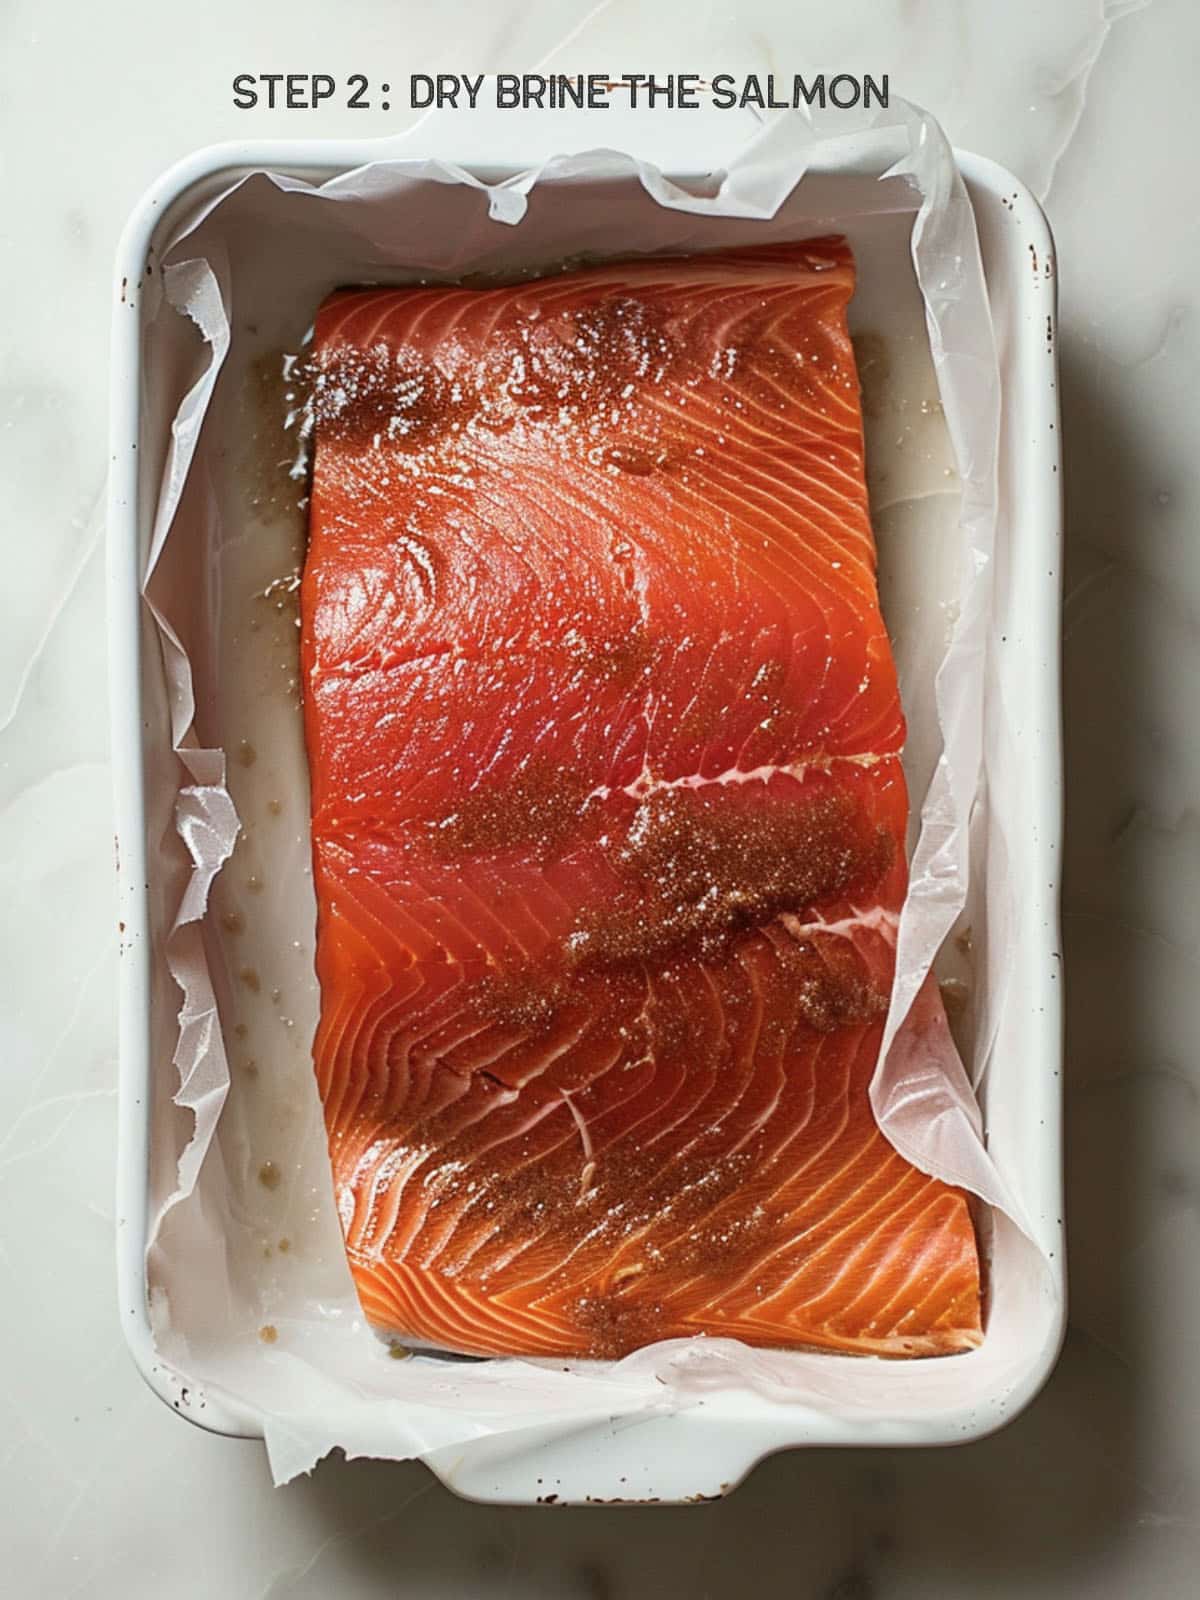 Close-up of a salmon fillet being coated in a dry brine of salt and brown sugar